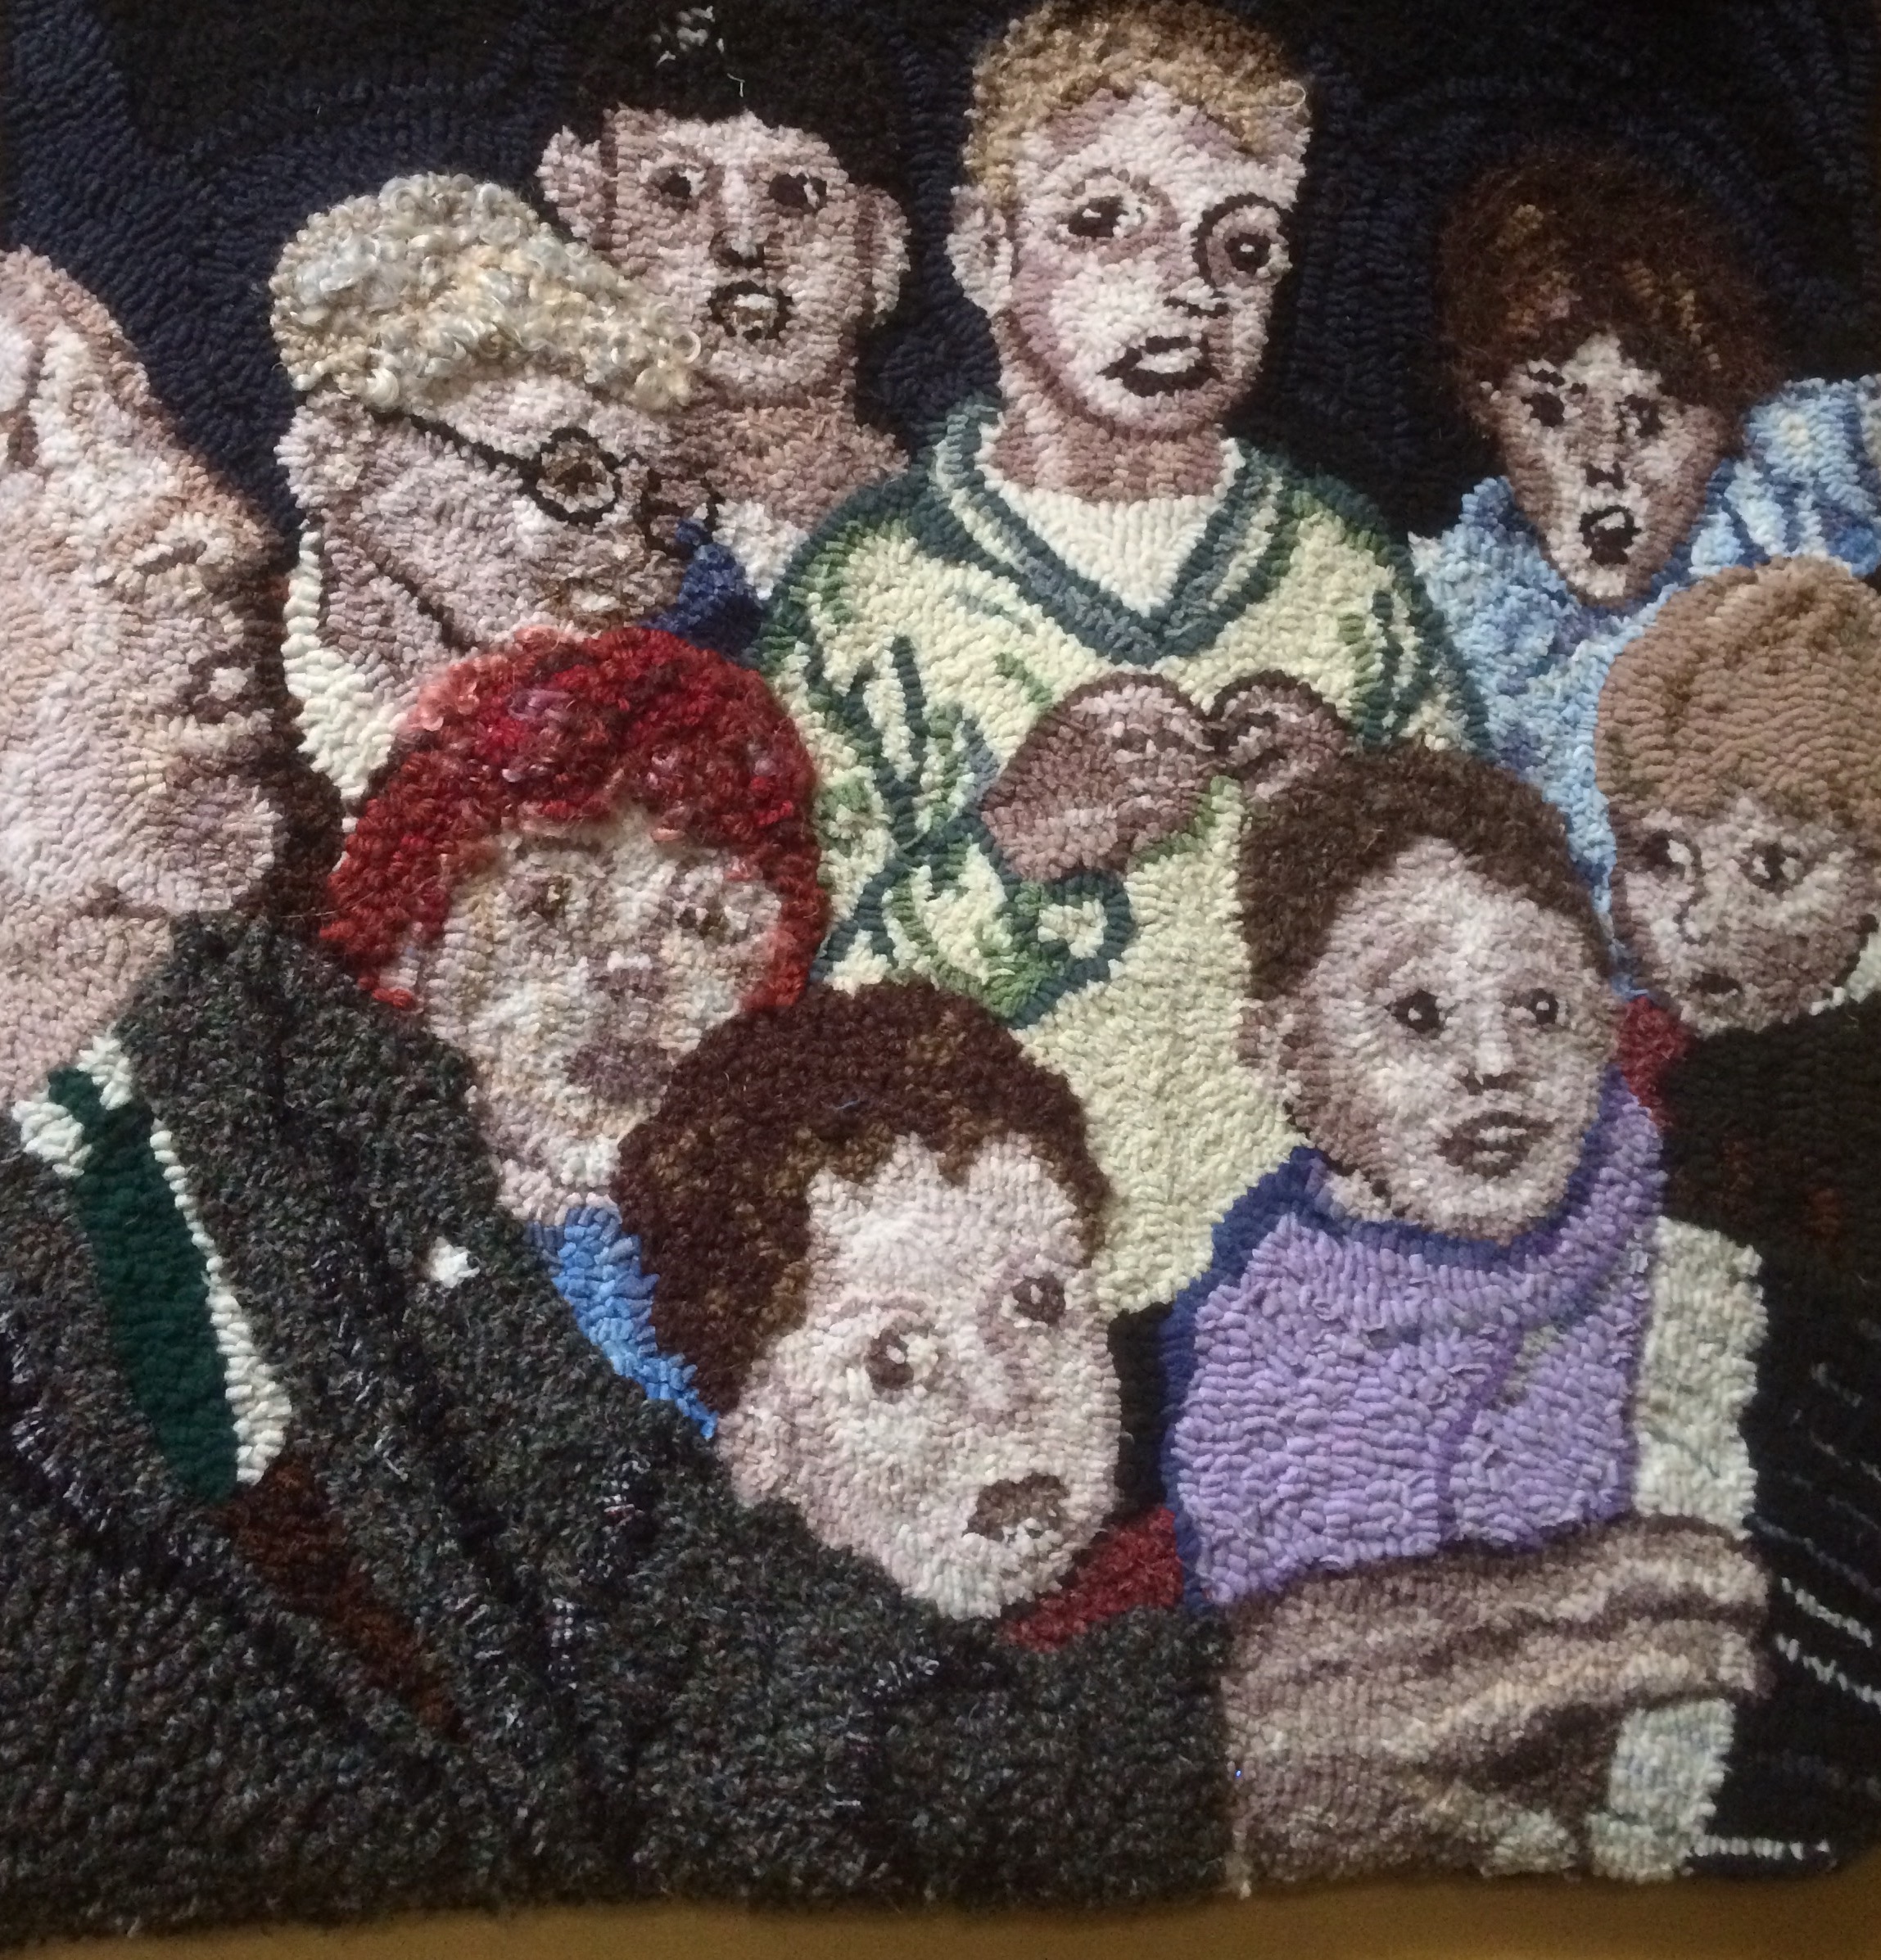 Man playing the piano with children rag rug artwork made by Heather Ritchie